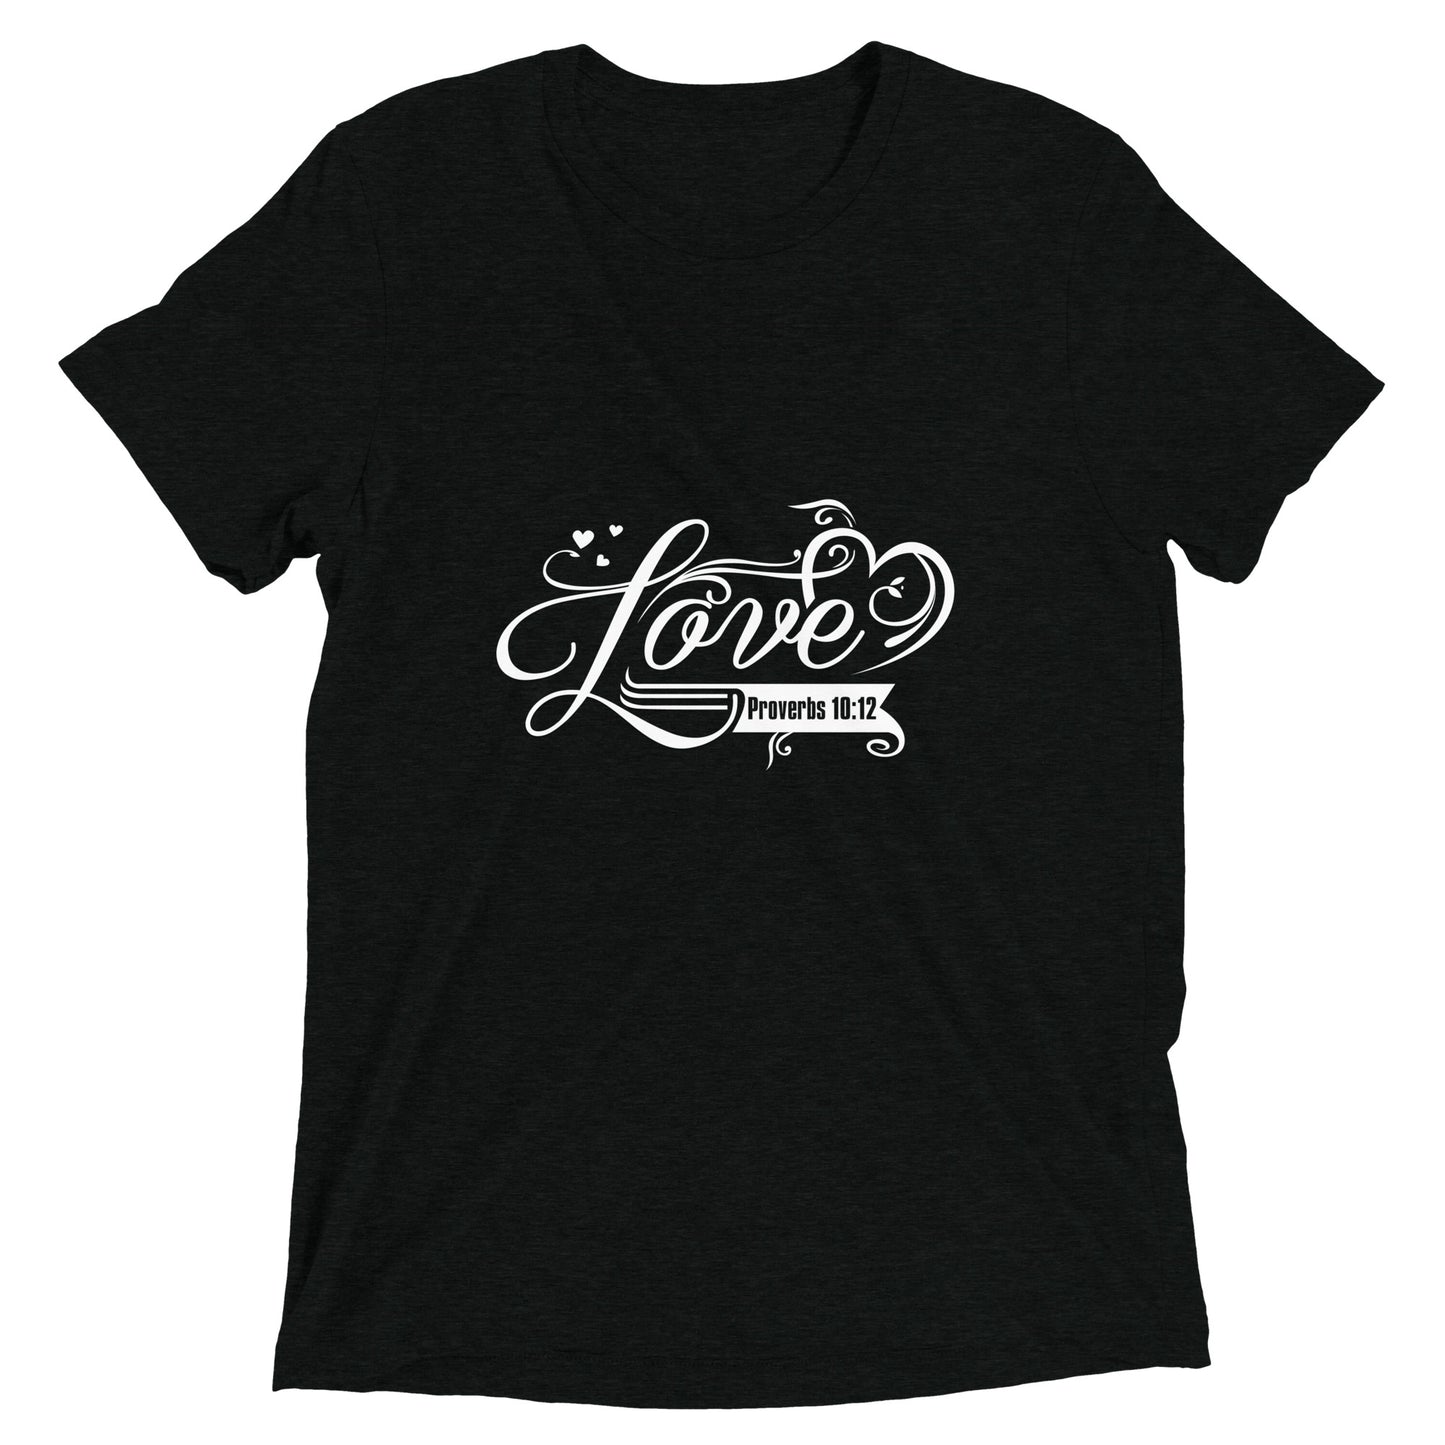 Love - Short sleeve t-shirt - View All Colors